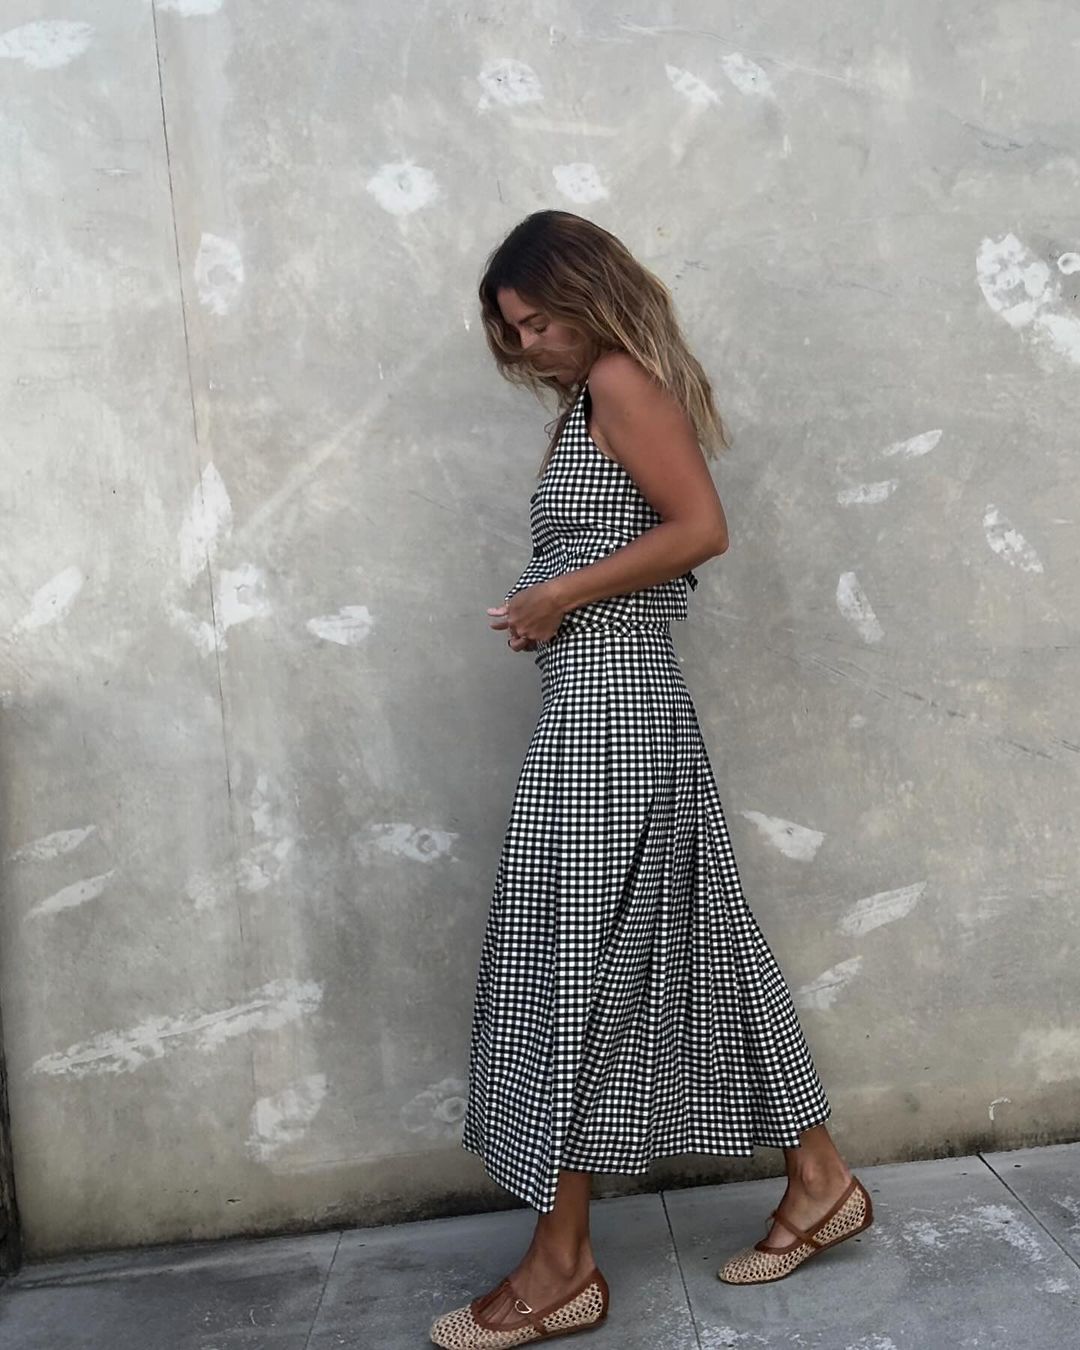 Elegant Summer Style: @angiesmithstyle wears a gingham waistcoat and matching midi skirt